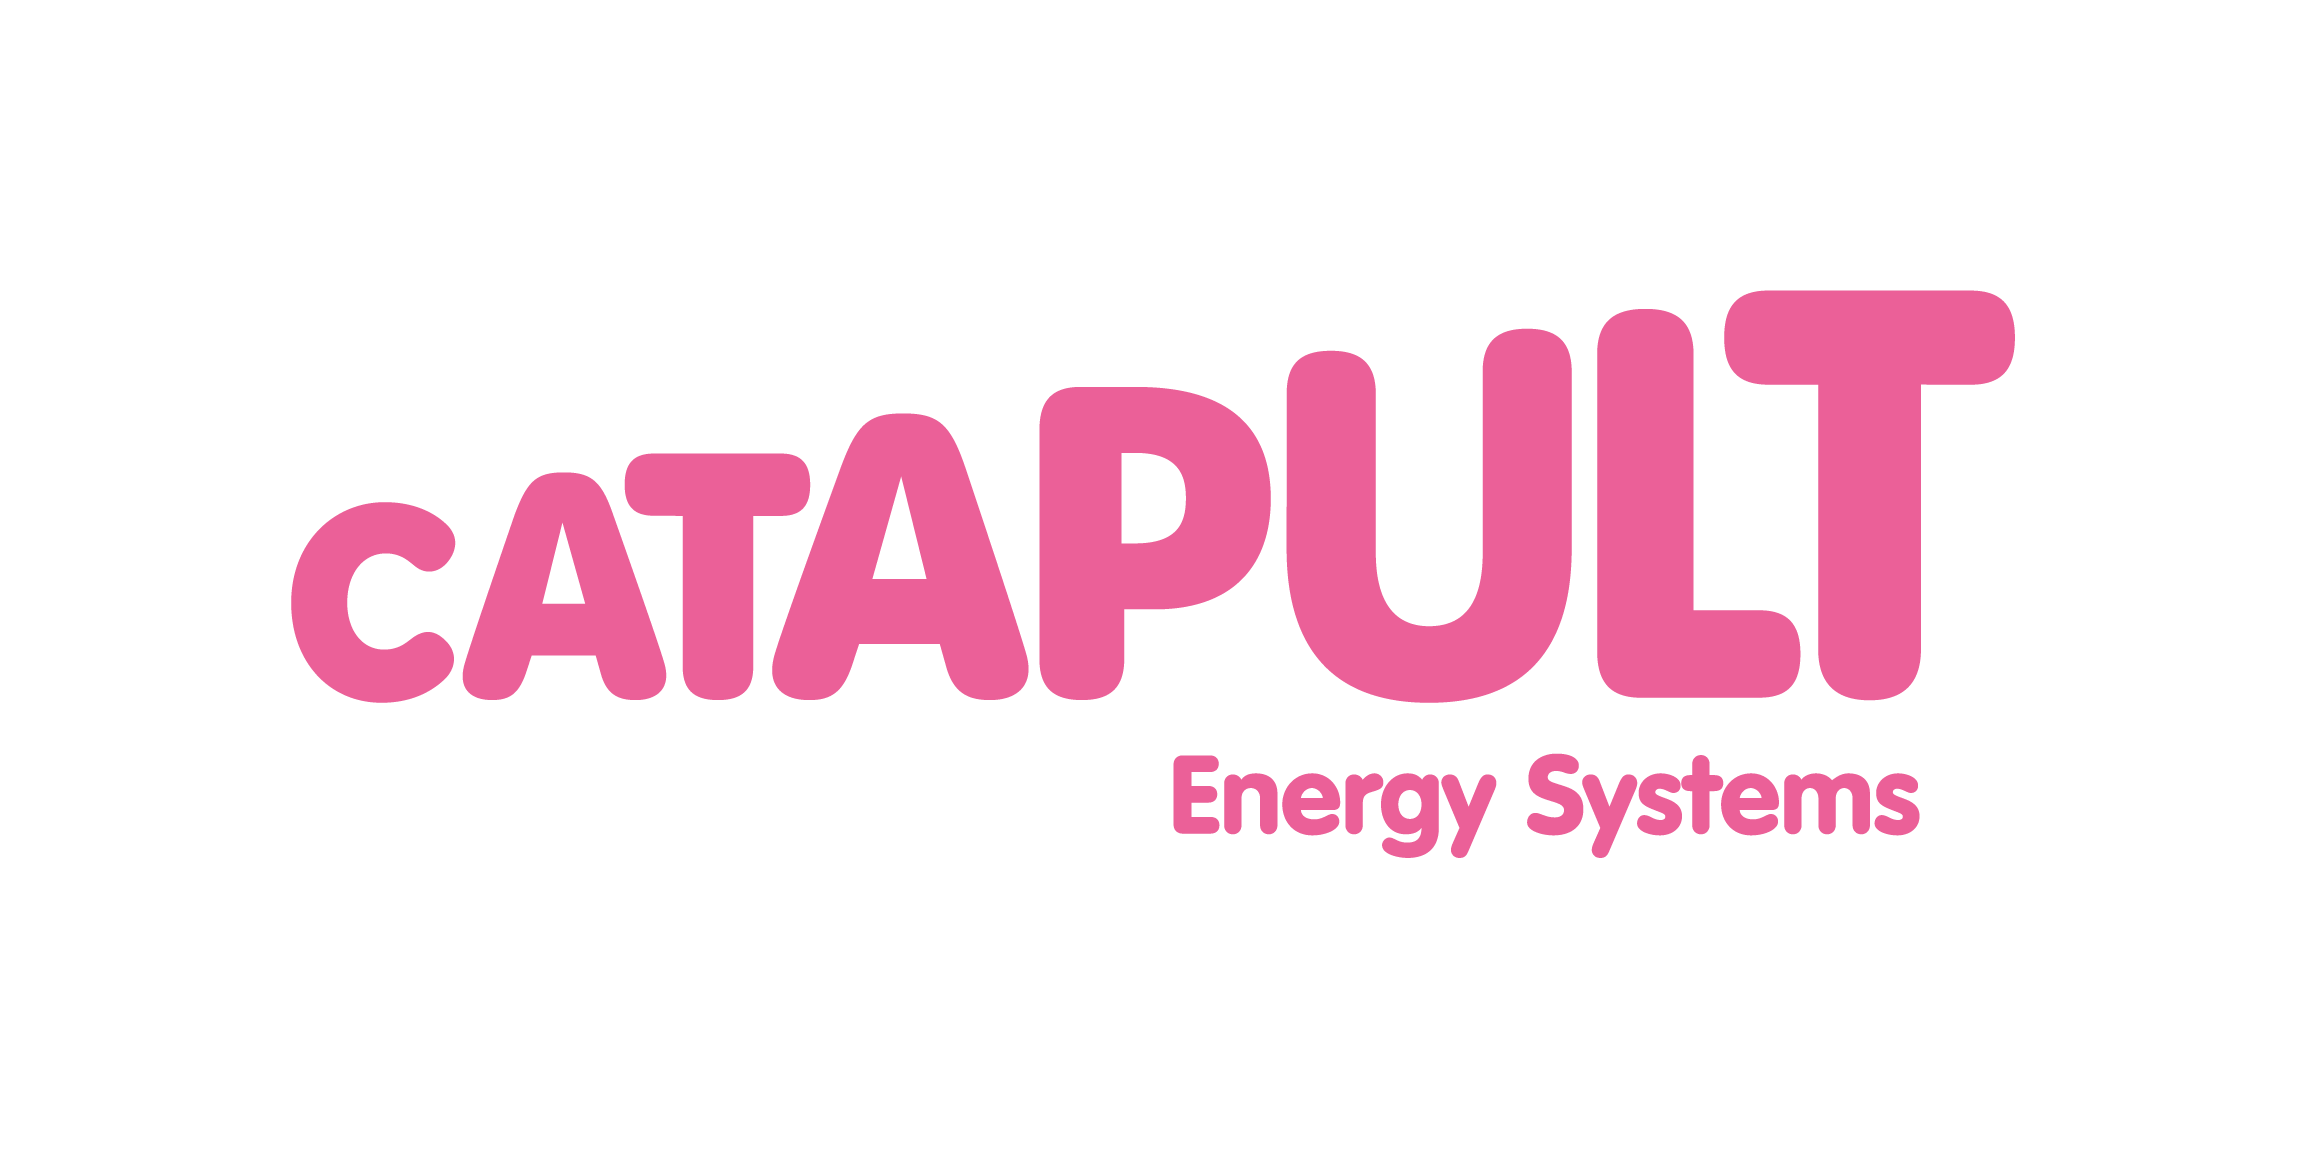 Design jobs at Energy Systems Catapult